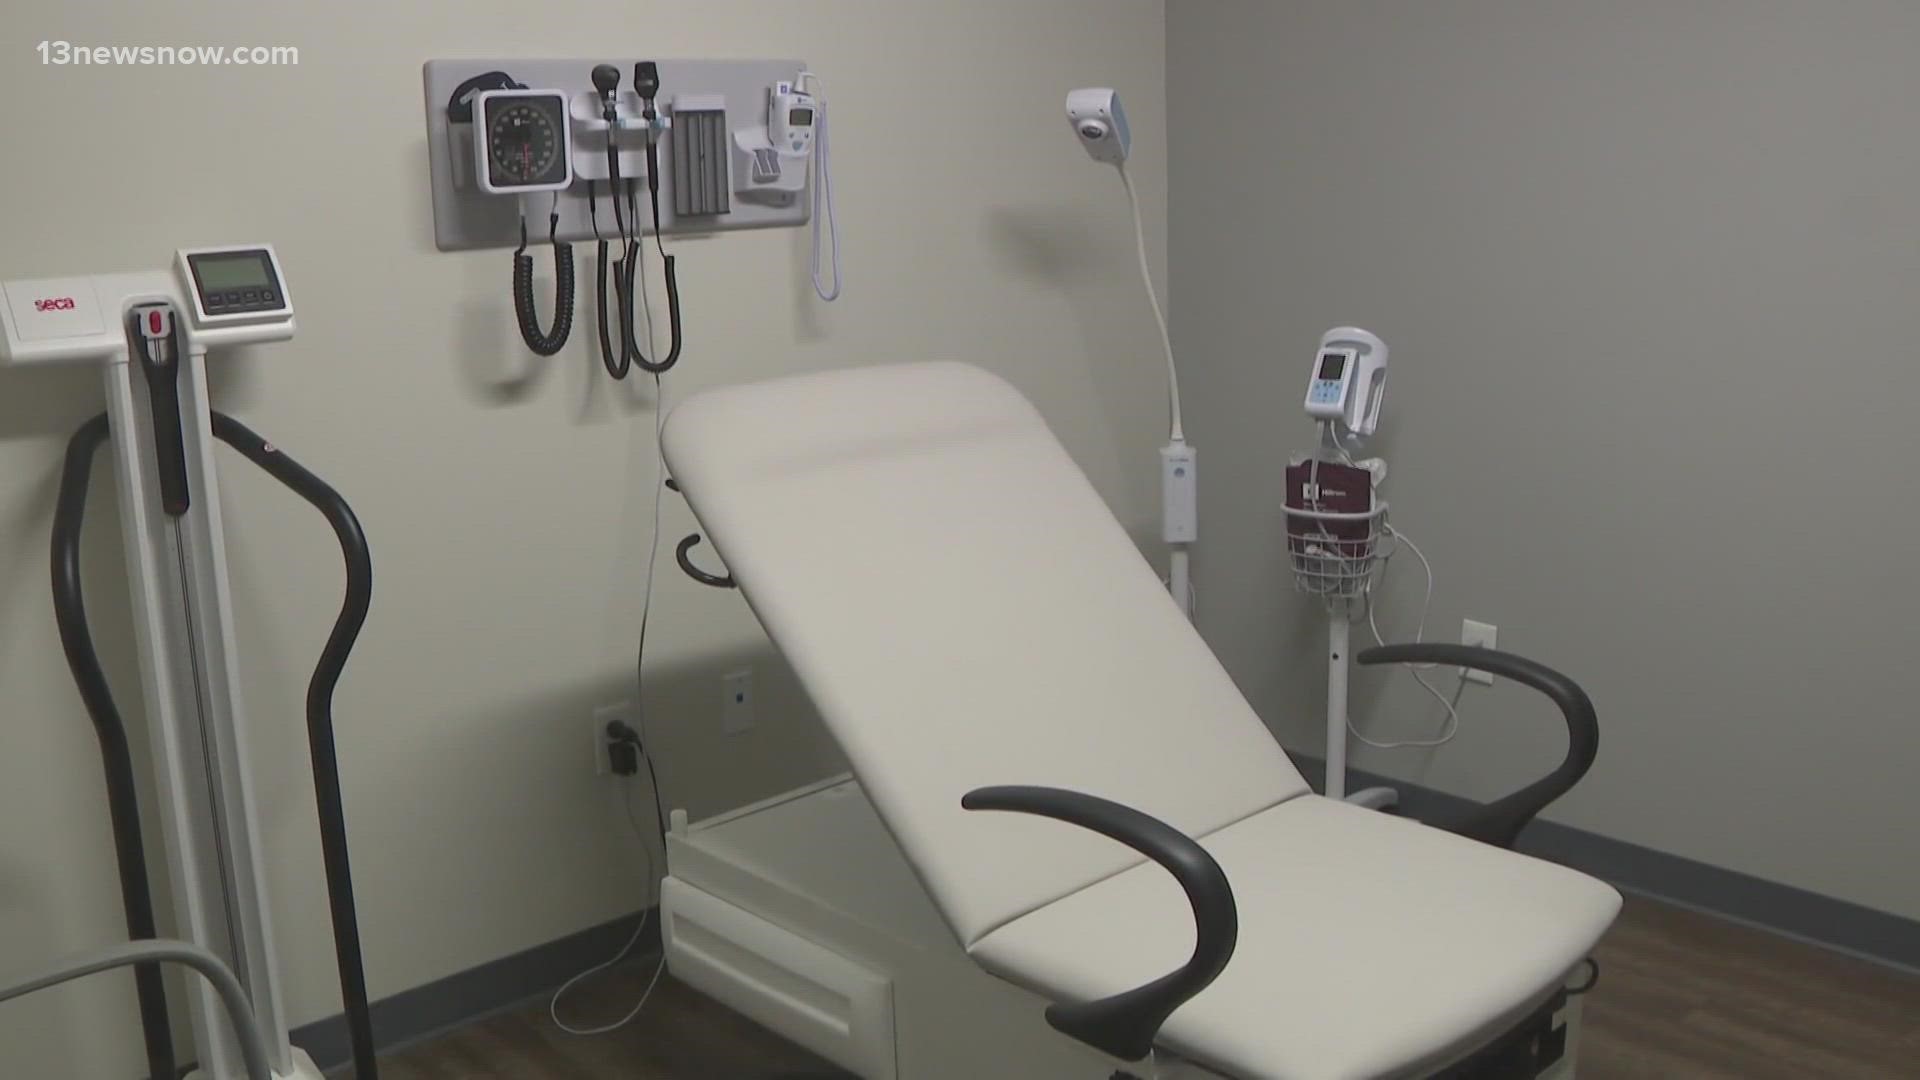 The new clinics will offer a variety of services, not limited to traditional healthcare.